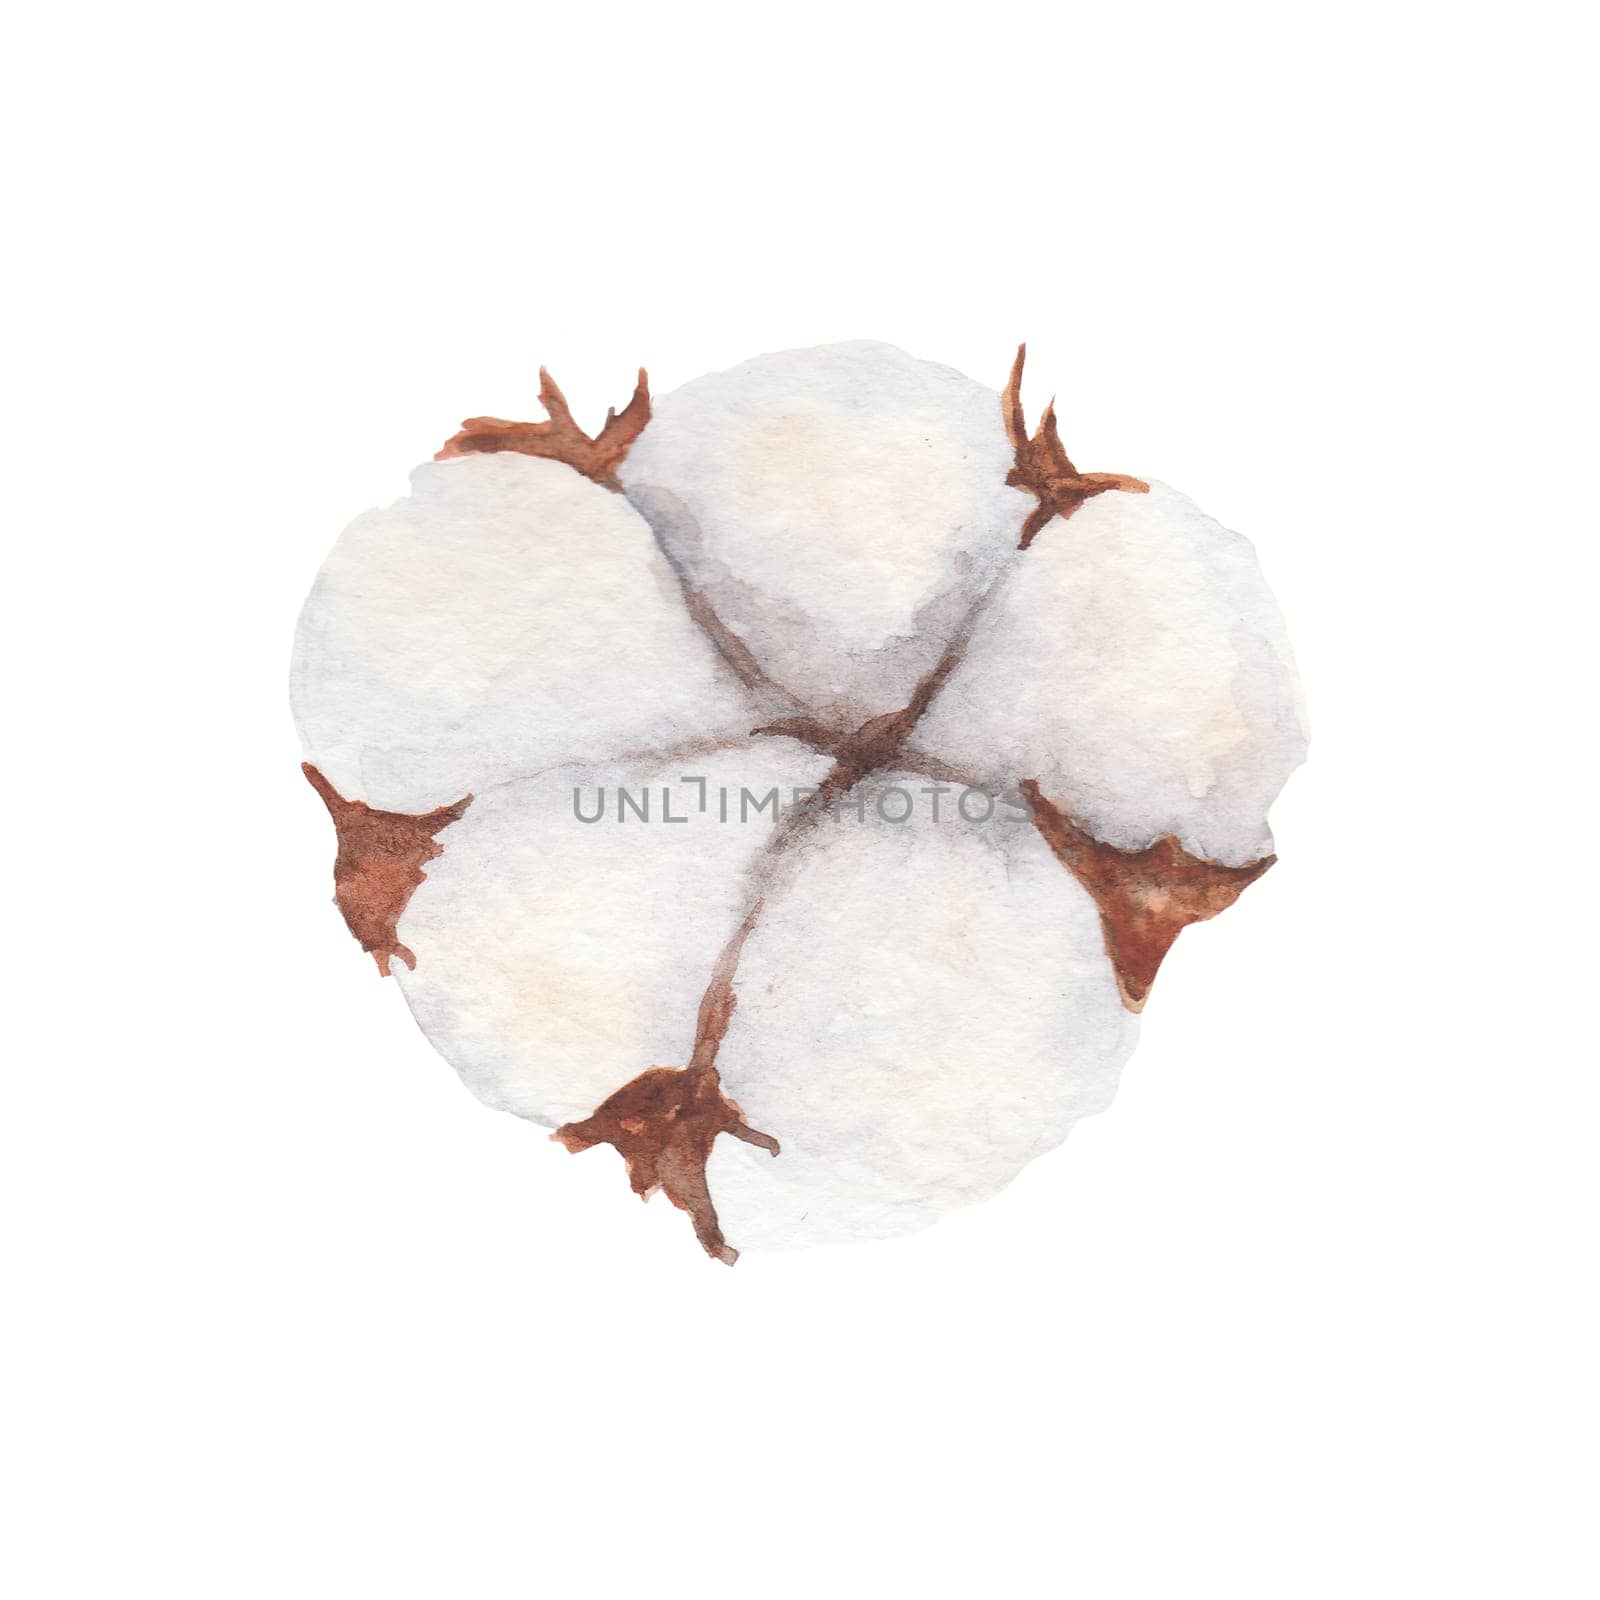 Cotton boll watercolor illustration isolated on white background. by florainlove_art